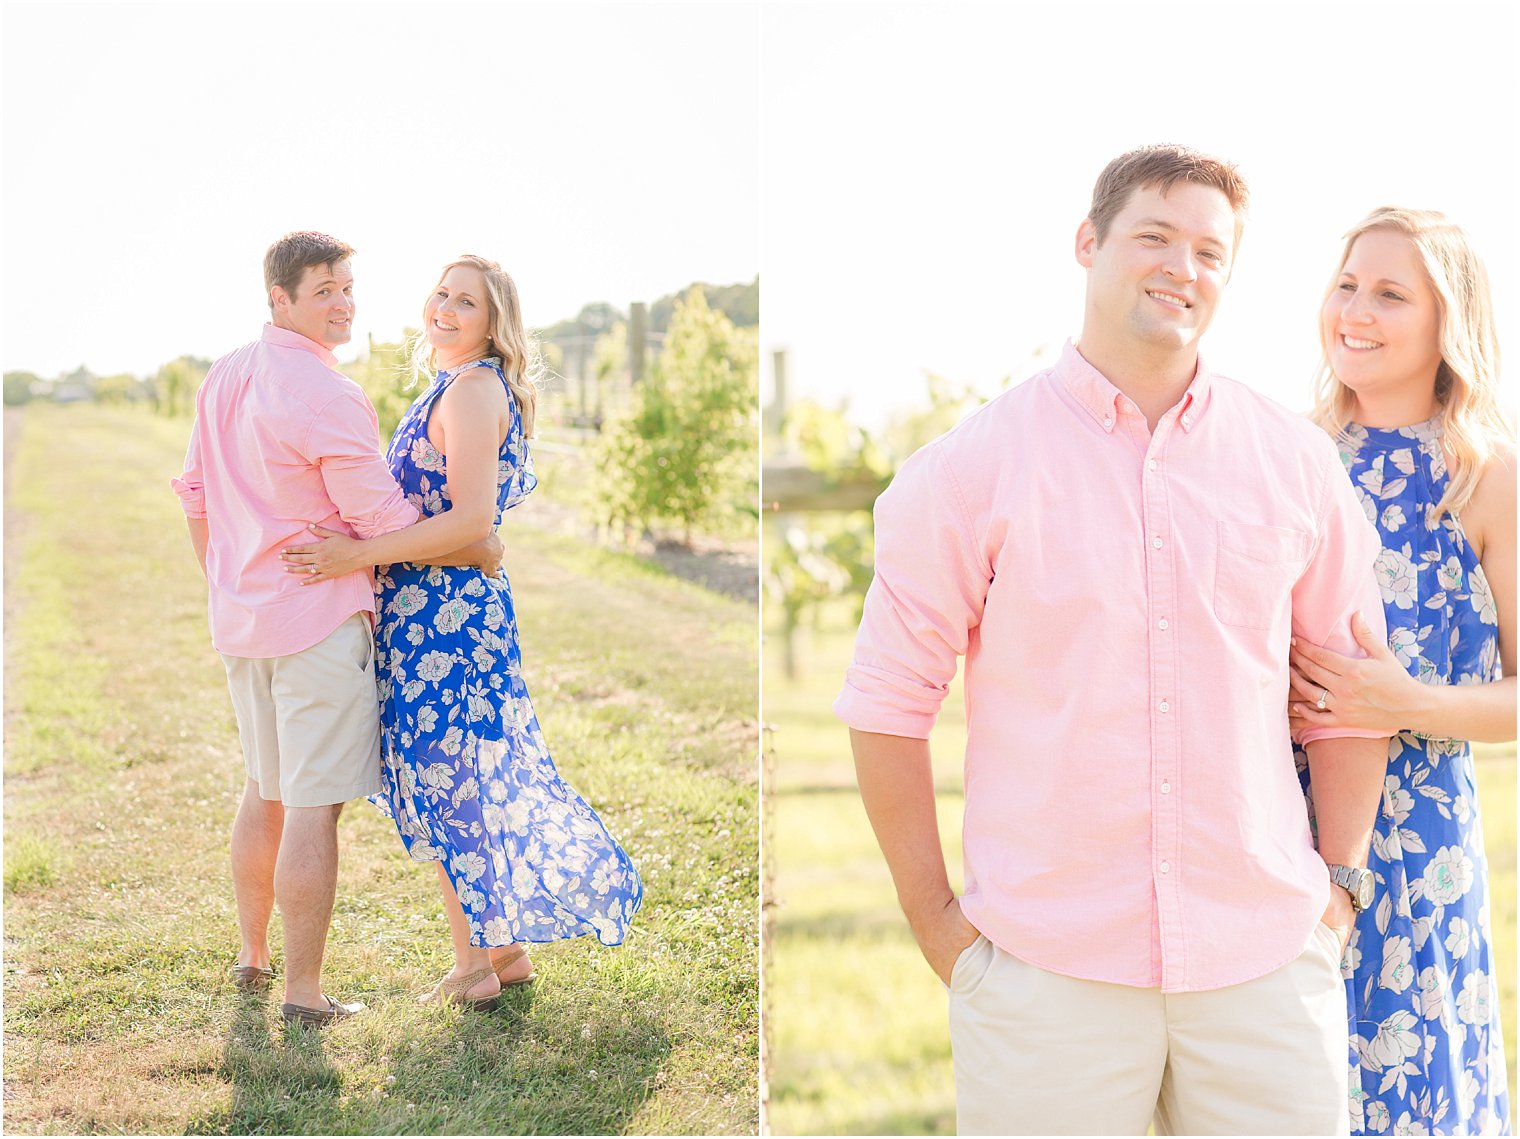 Summer chic engagement session at Laurita Winery